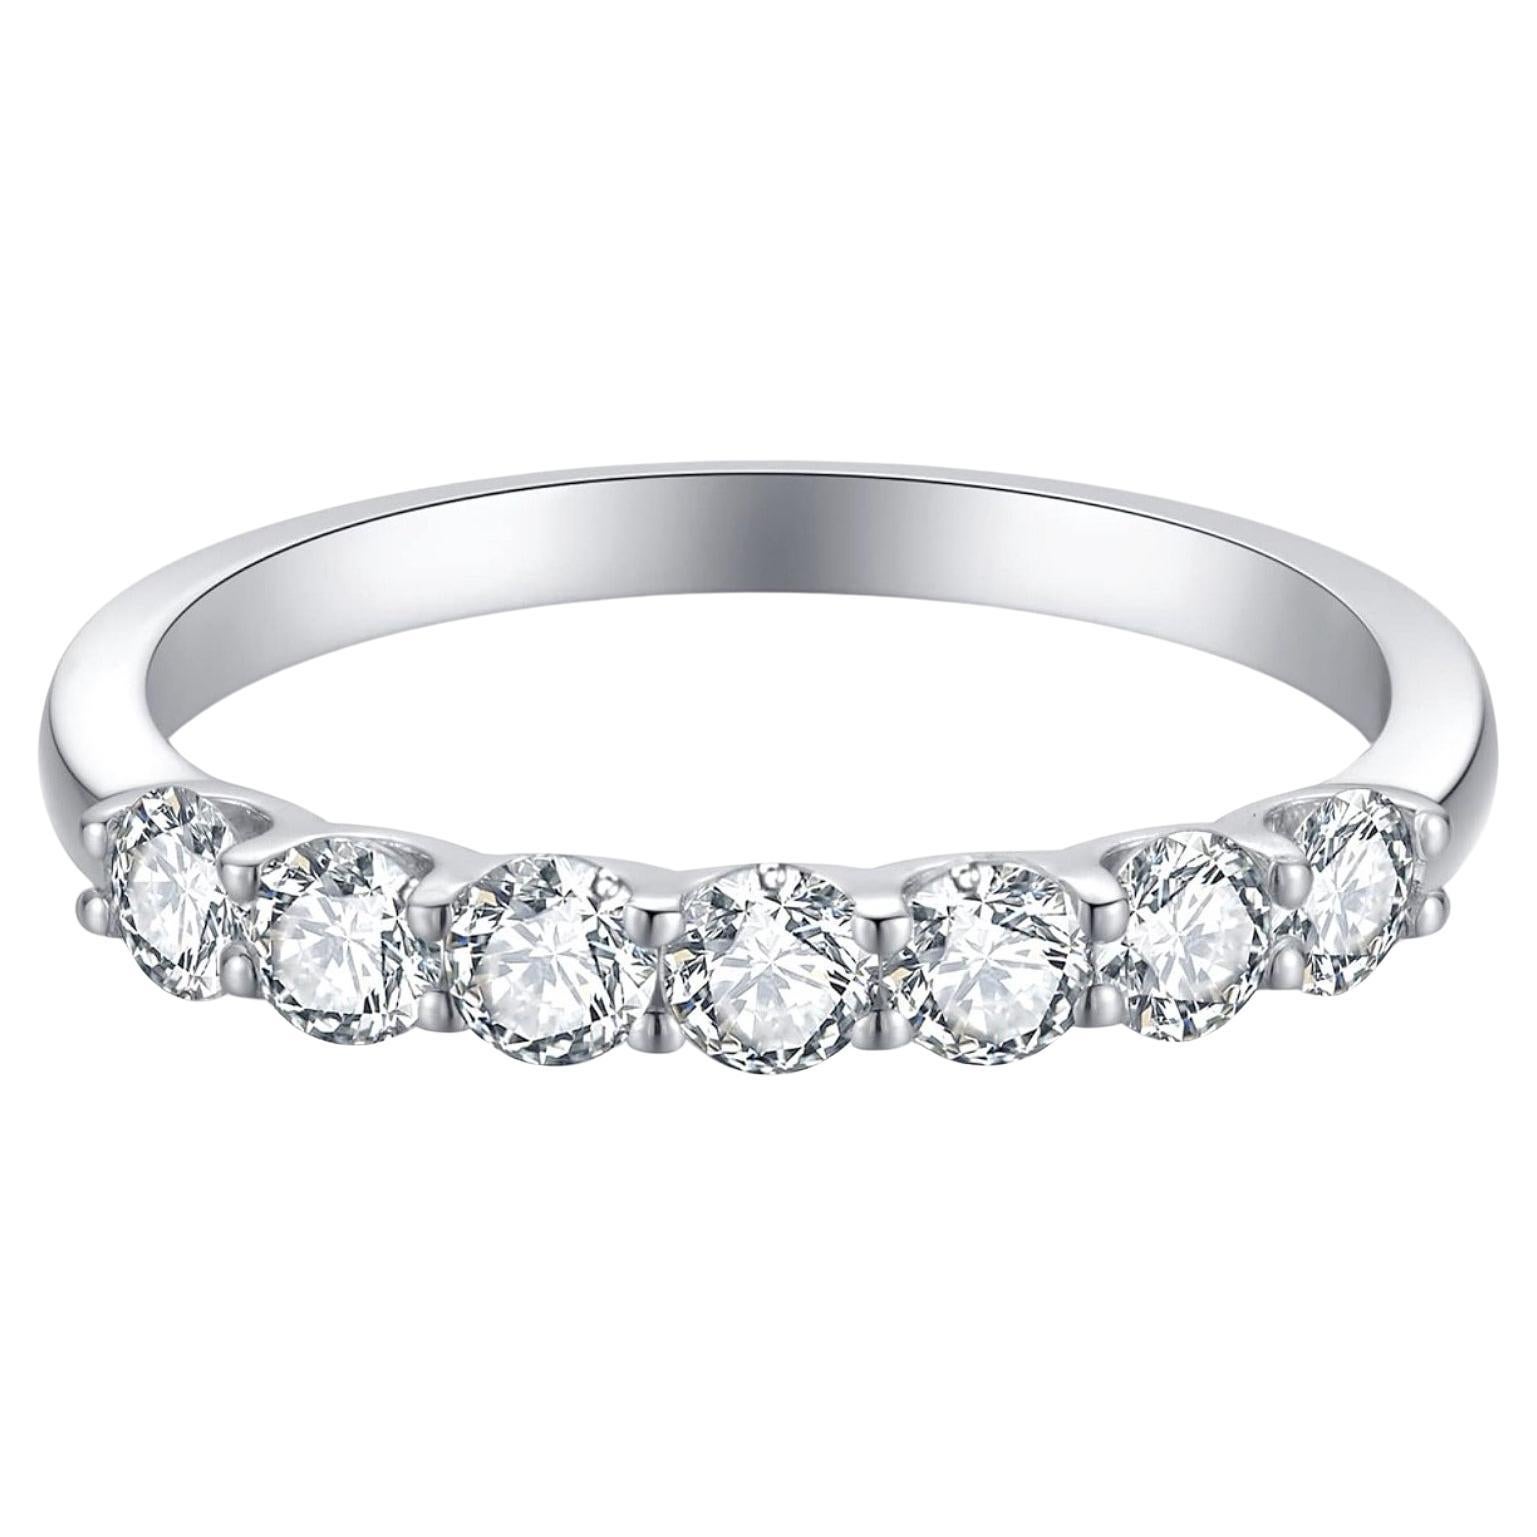 18K White Gold Half Eternity Ring with Round Brilliant Diamonds (Made to Order)